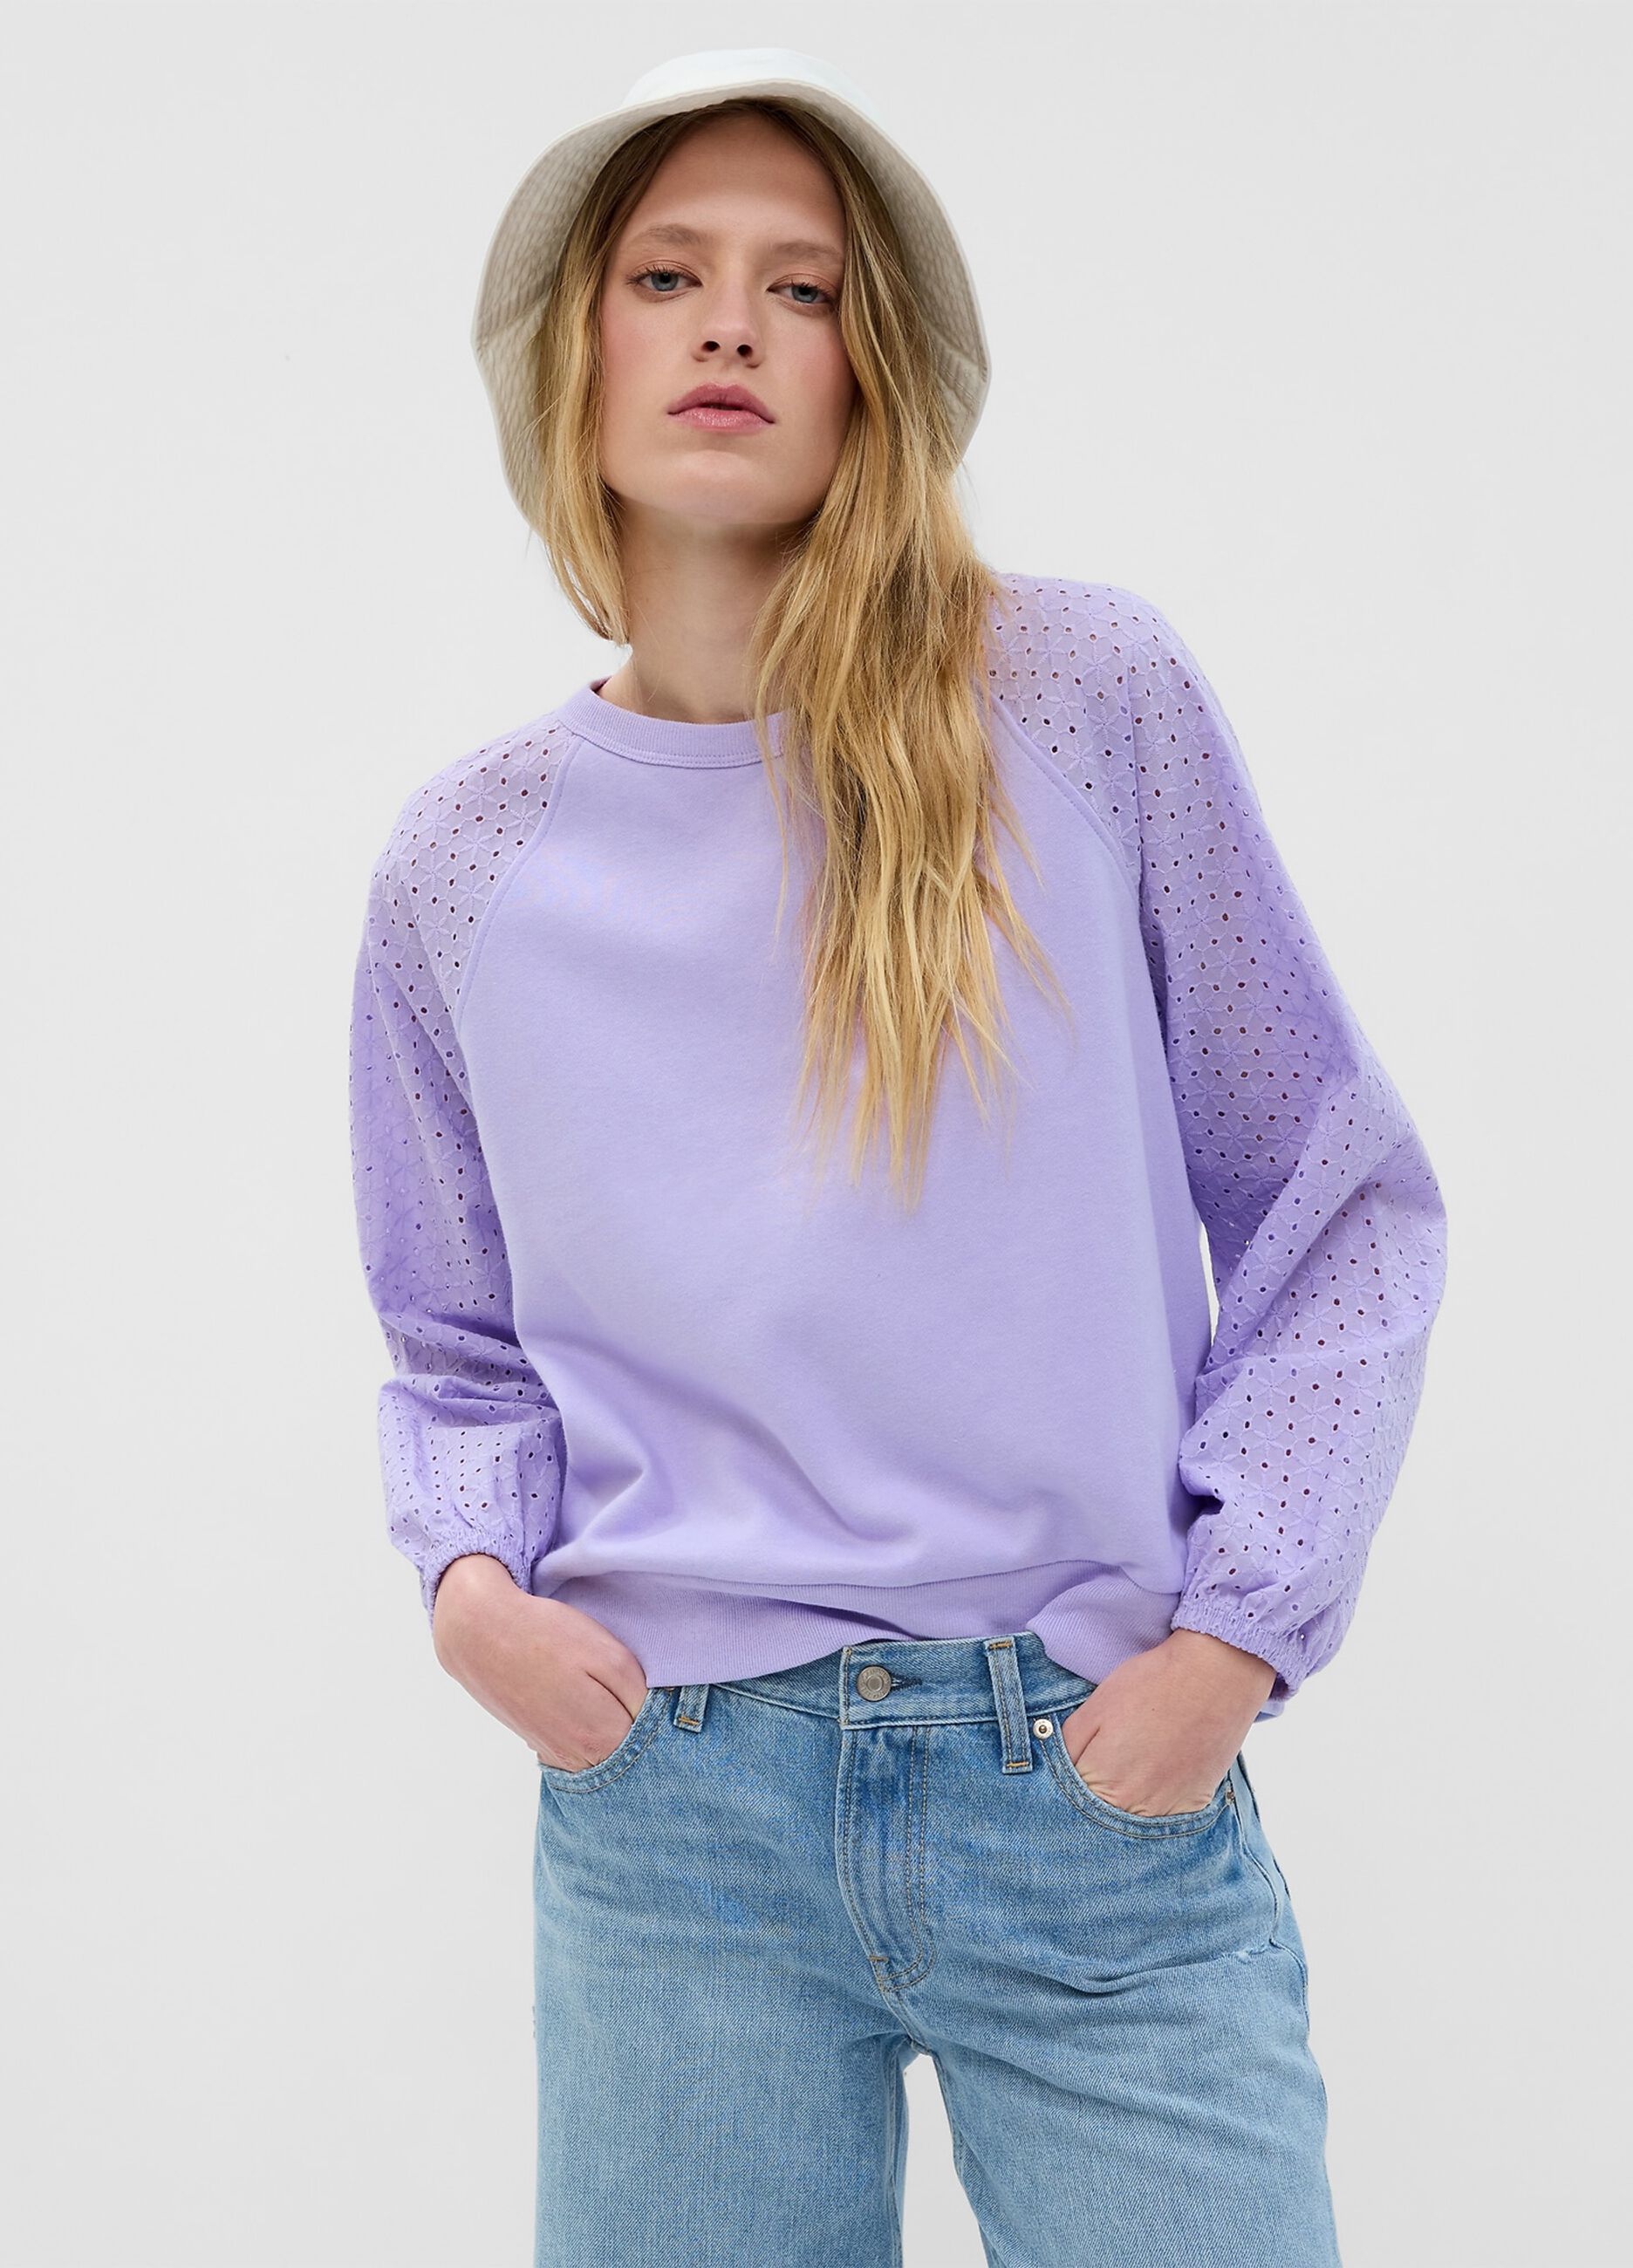 Sweatshirt with broderie anglaise lace sleeves